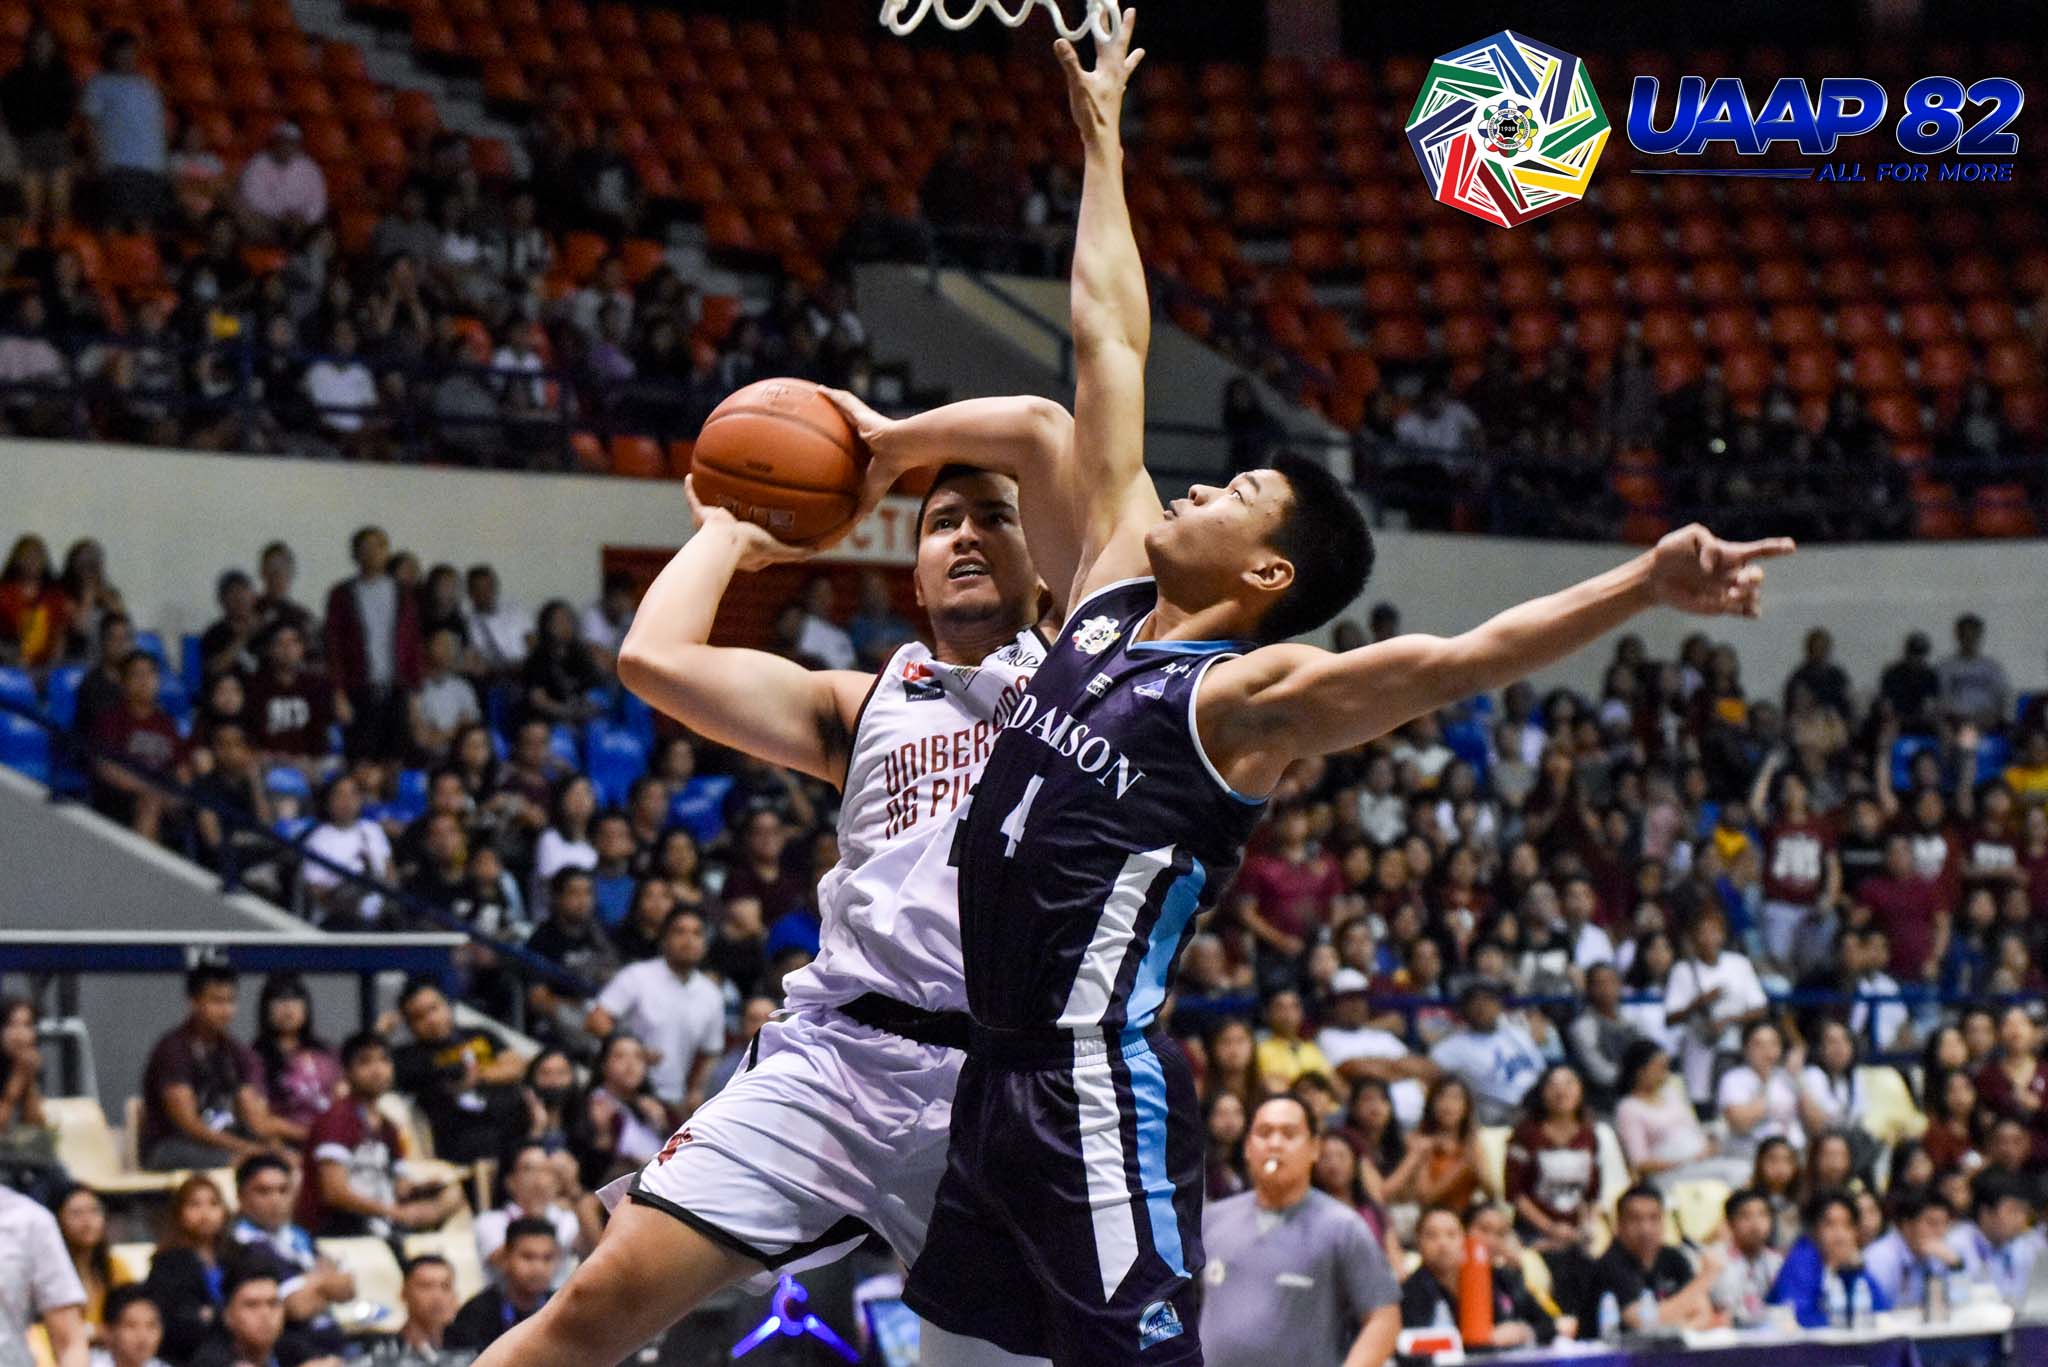 UP completes thrilling comeback to beat Adamson anew